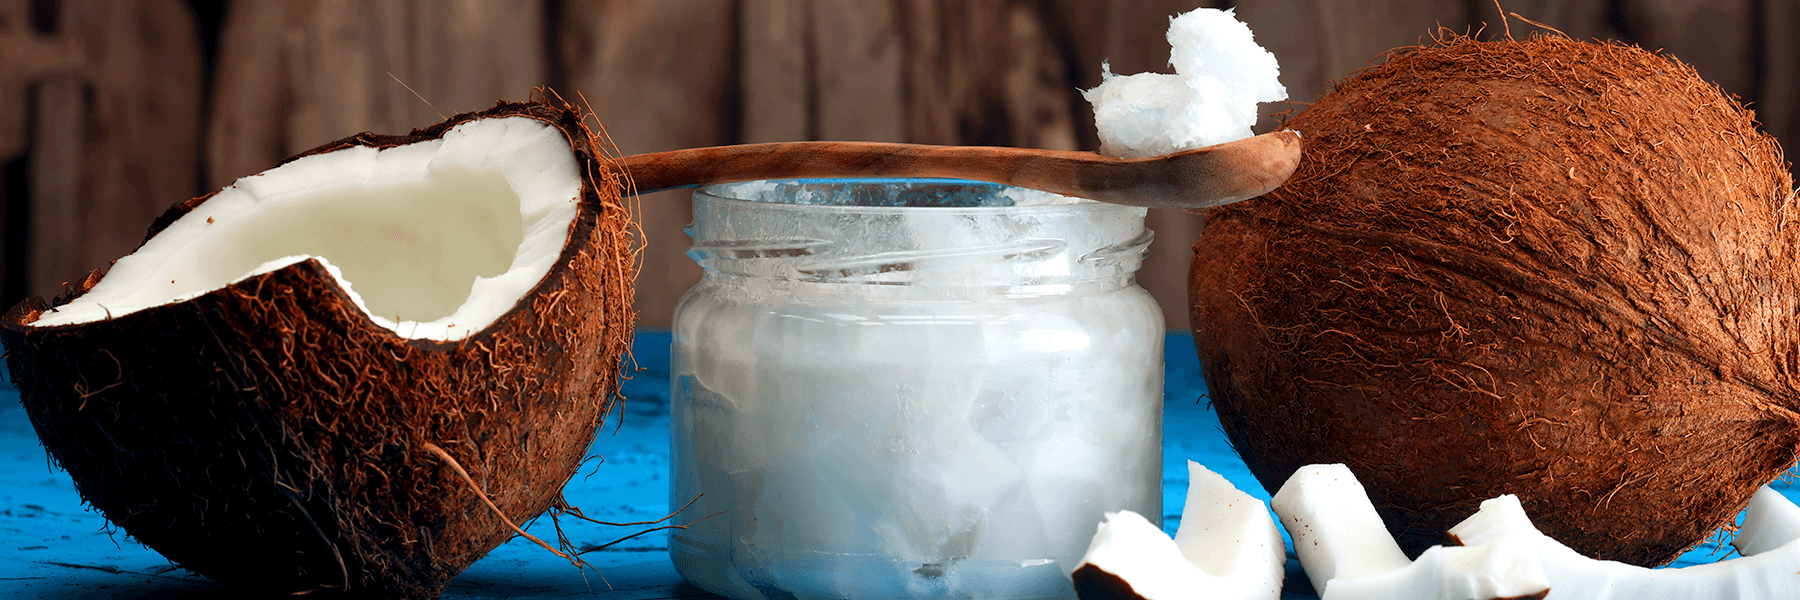 Benefits of coconut oil pulling